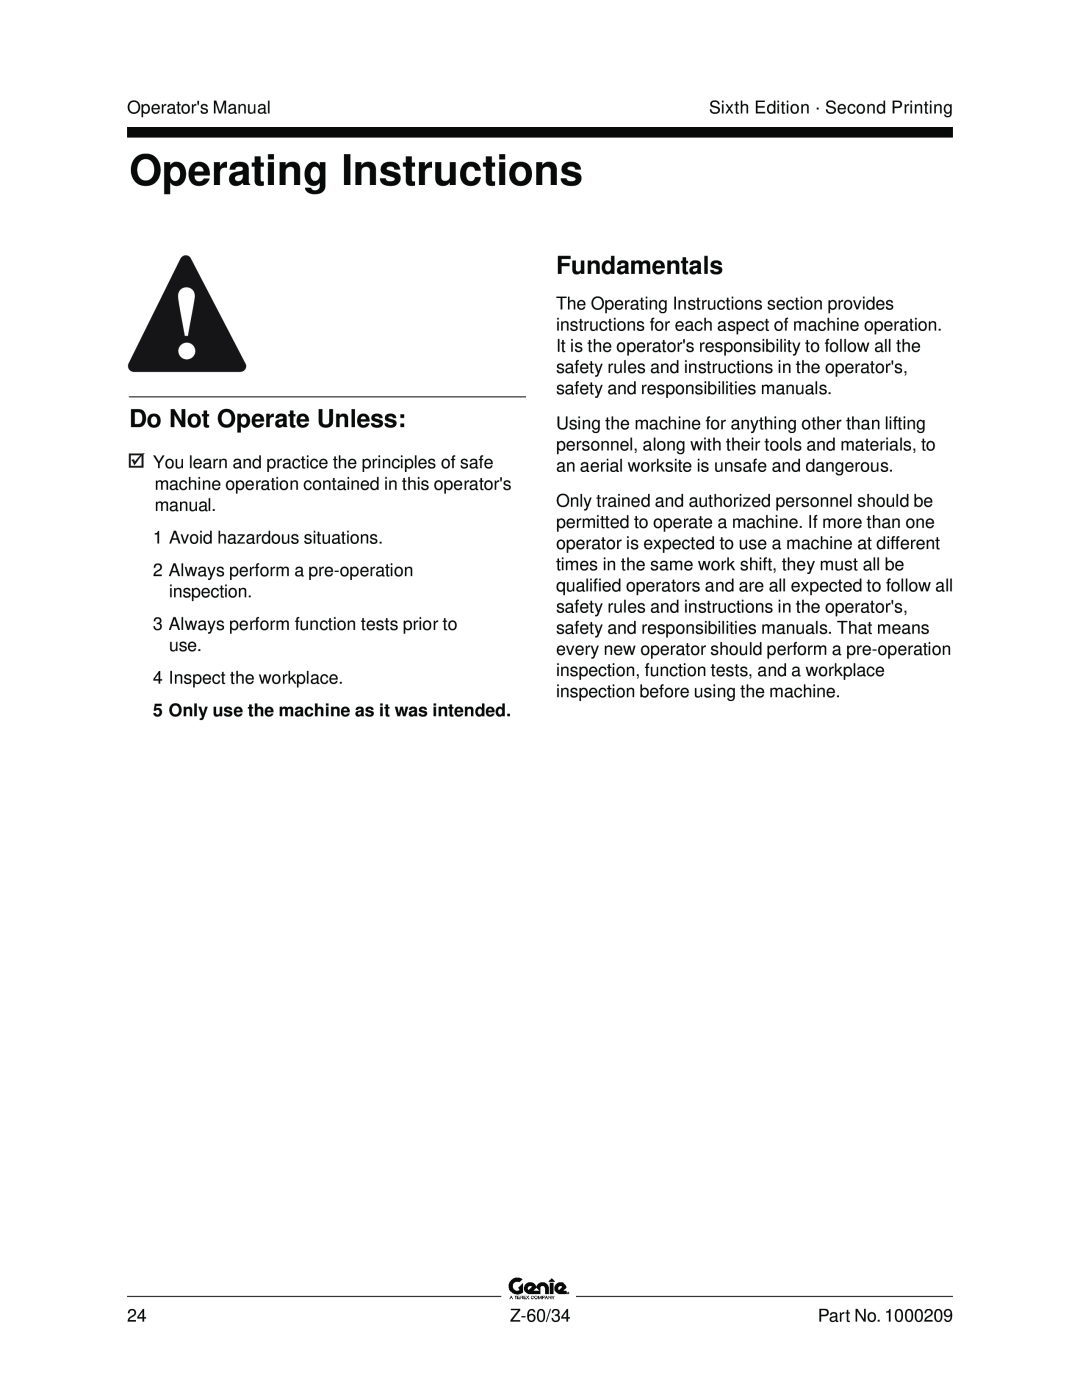 Genie Z-60, Z-34 Operating Instructions, 5Only use the machine as it was intended, Do Not Operate Unless, Fundamentals 